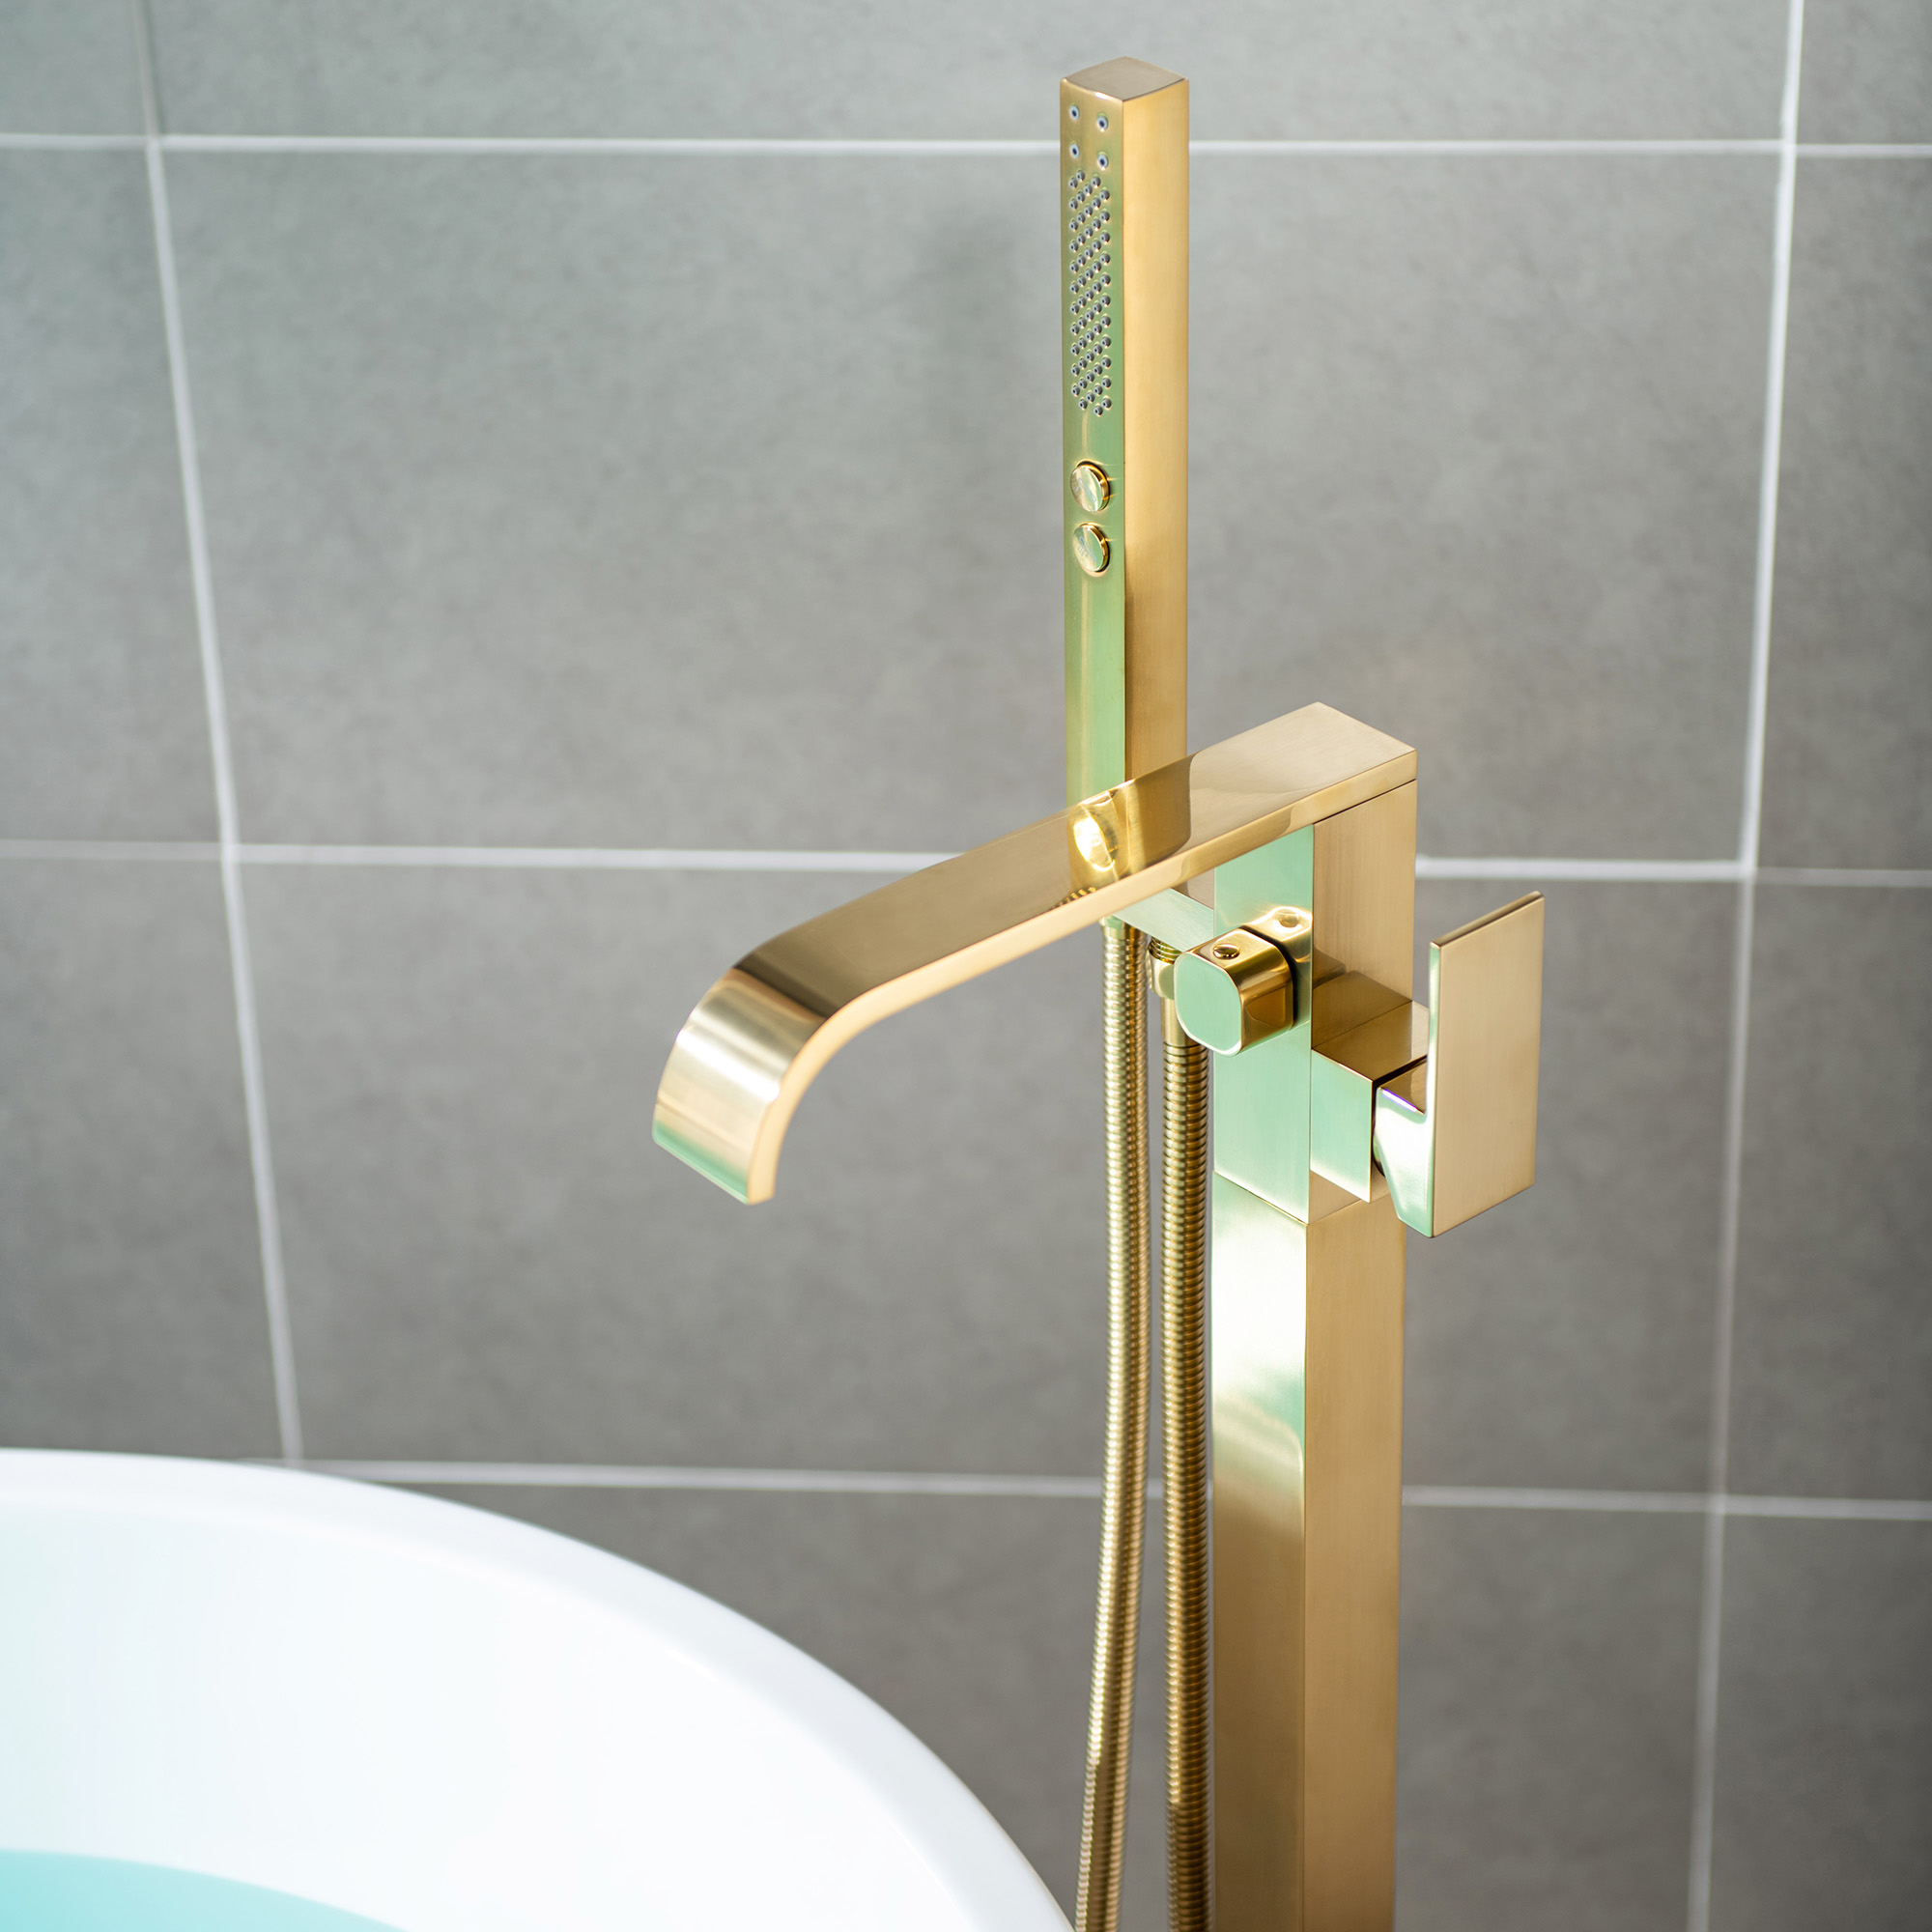  WOODBRIDGE F0039BG Contemporary Single Handle Floor Mount Freestanding Tub Filler Faucet with Hand shower in Brushed Gold Finish._12216